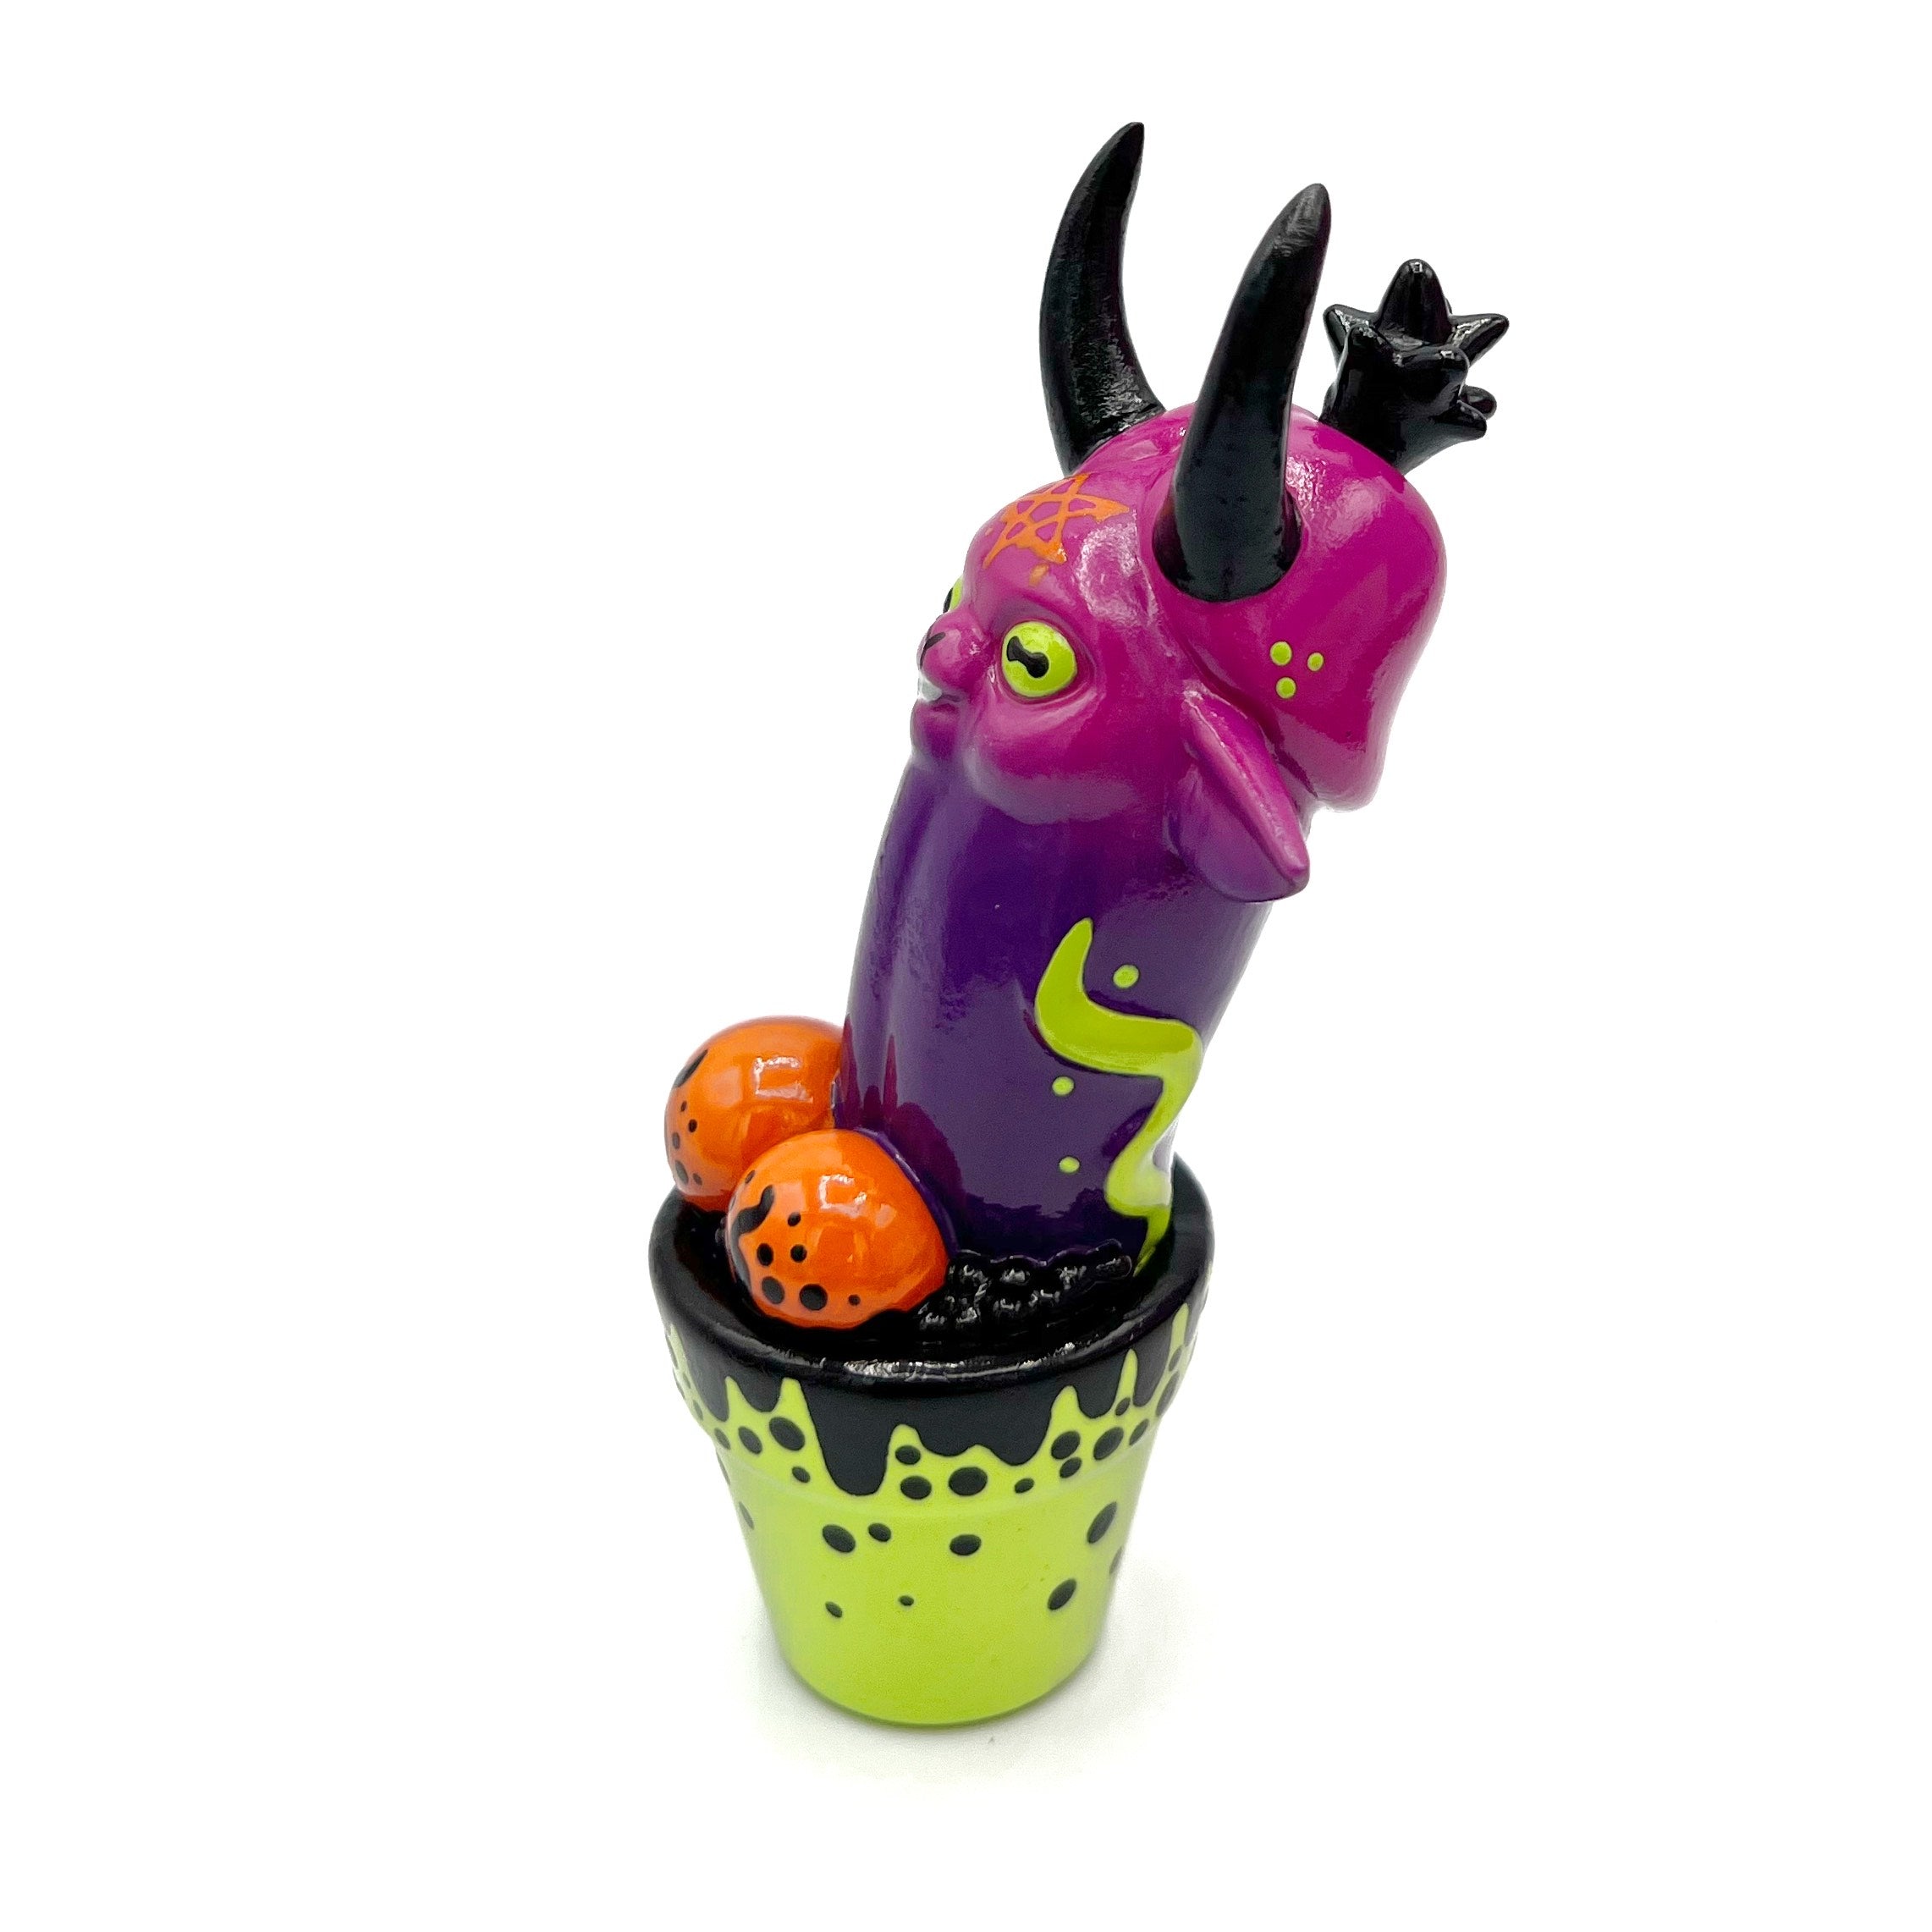 Monster figurine with yellow eyeball, colorful cup, and group of orange objects, part of Simon Says Macy & Friends - East Van Satan by Ghostfox Toys.